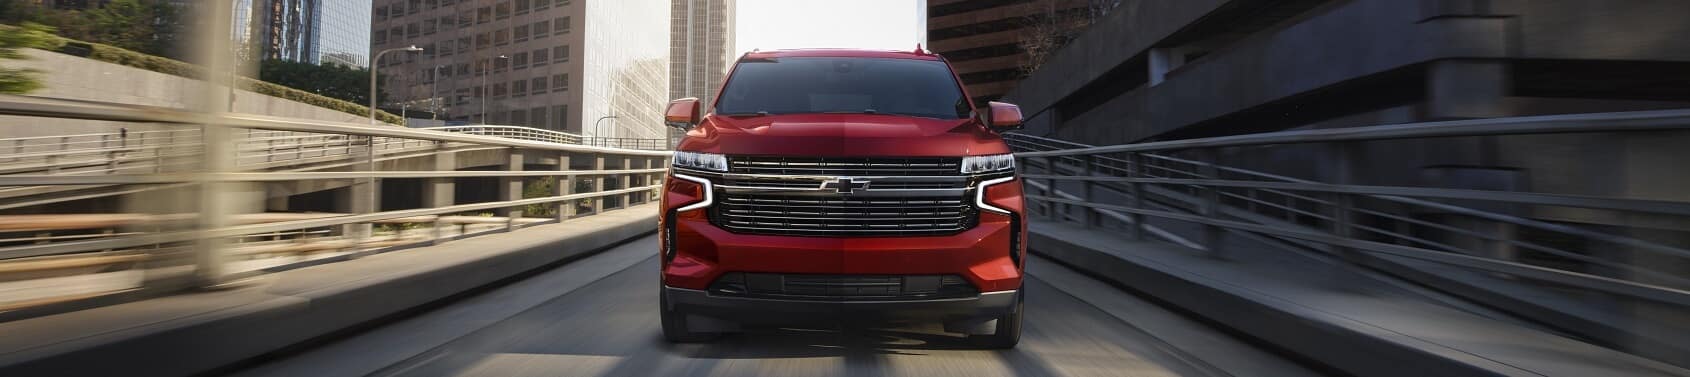 2021 Chevy Tahoe Review